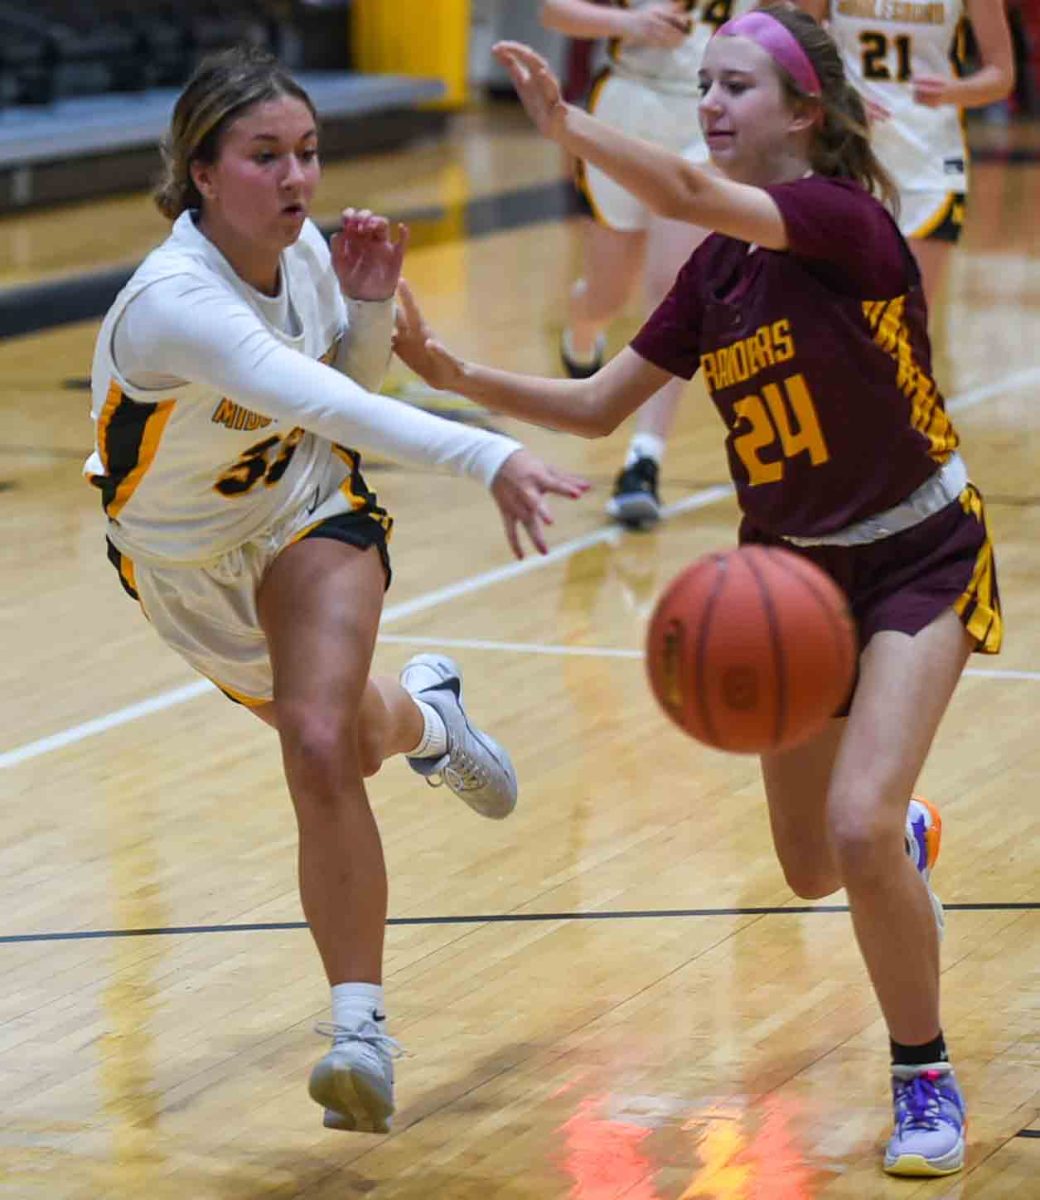 Emily Lambert, pictured in action earlier this season, scored 16 points in Middlesboros win over Carroll County in Gatlinburg, Tenn.